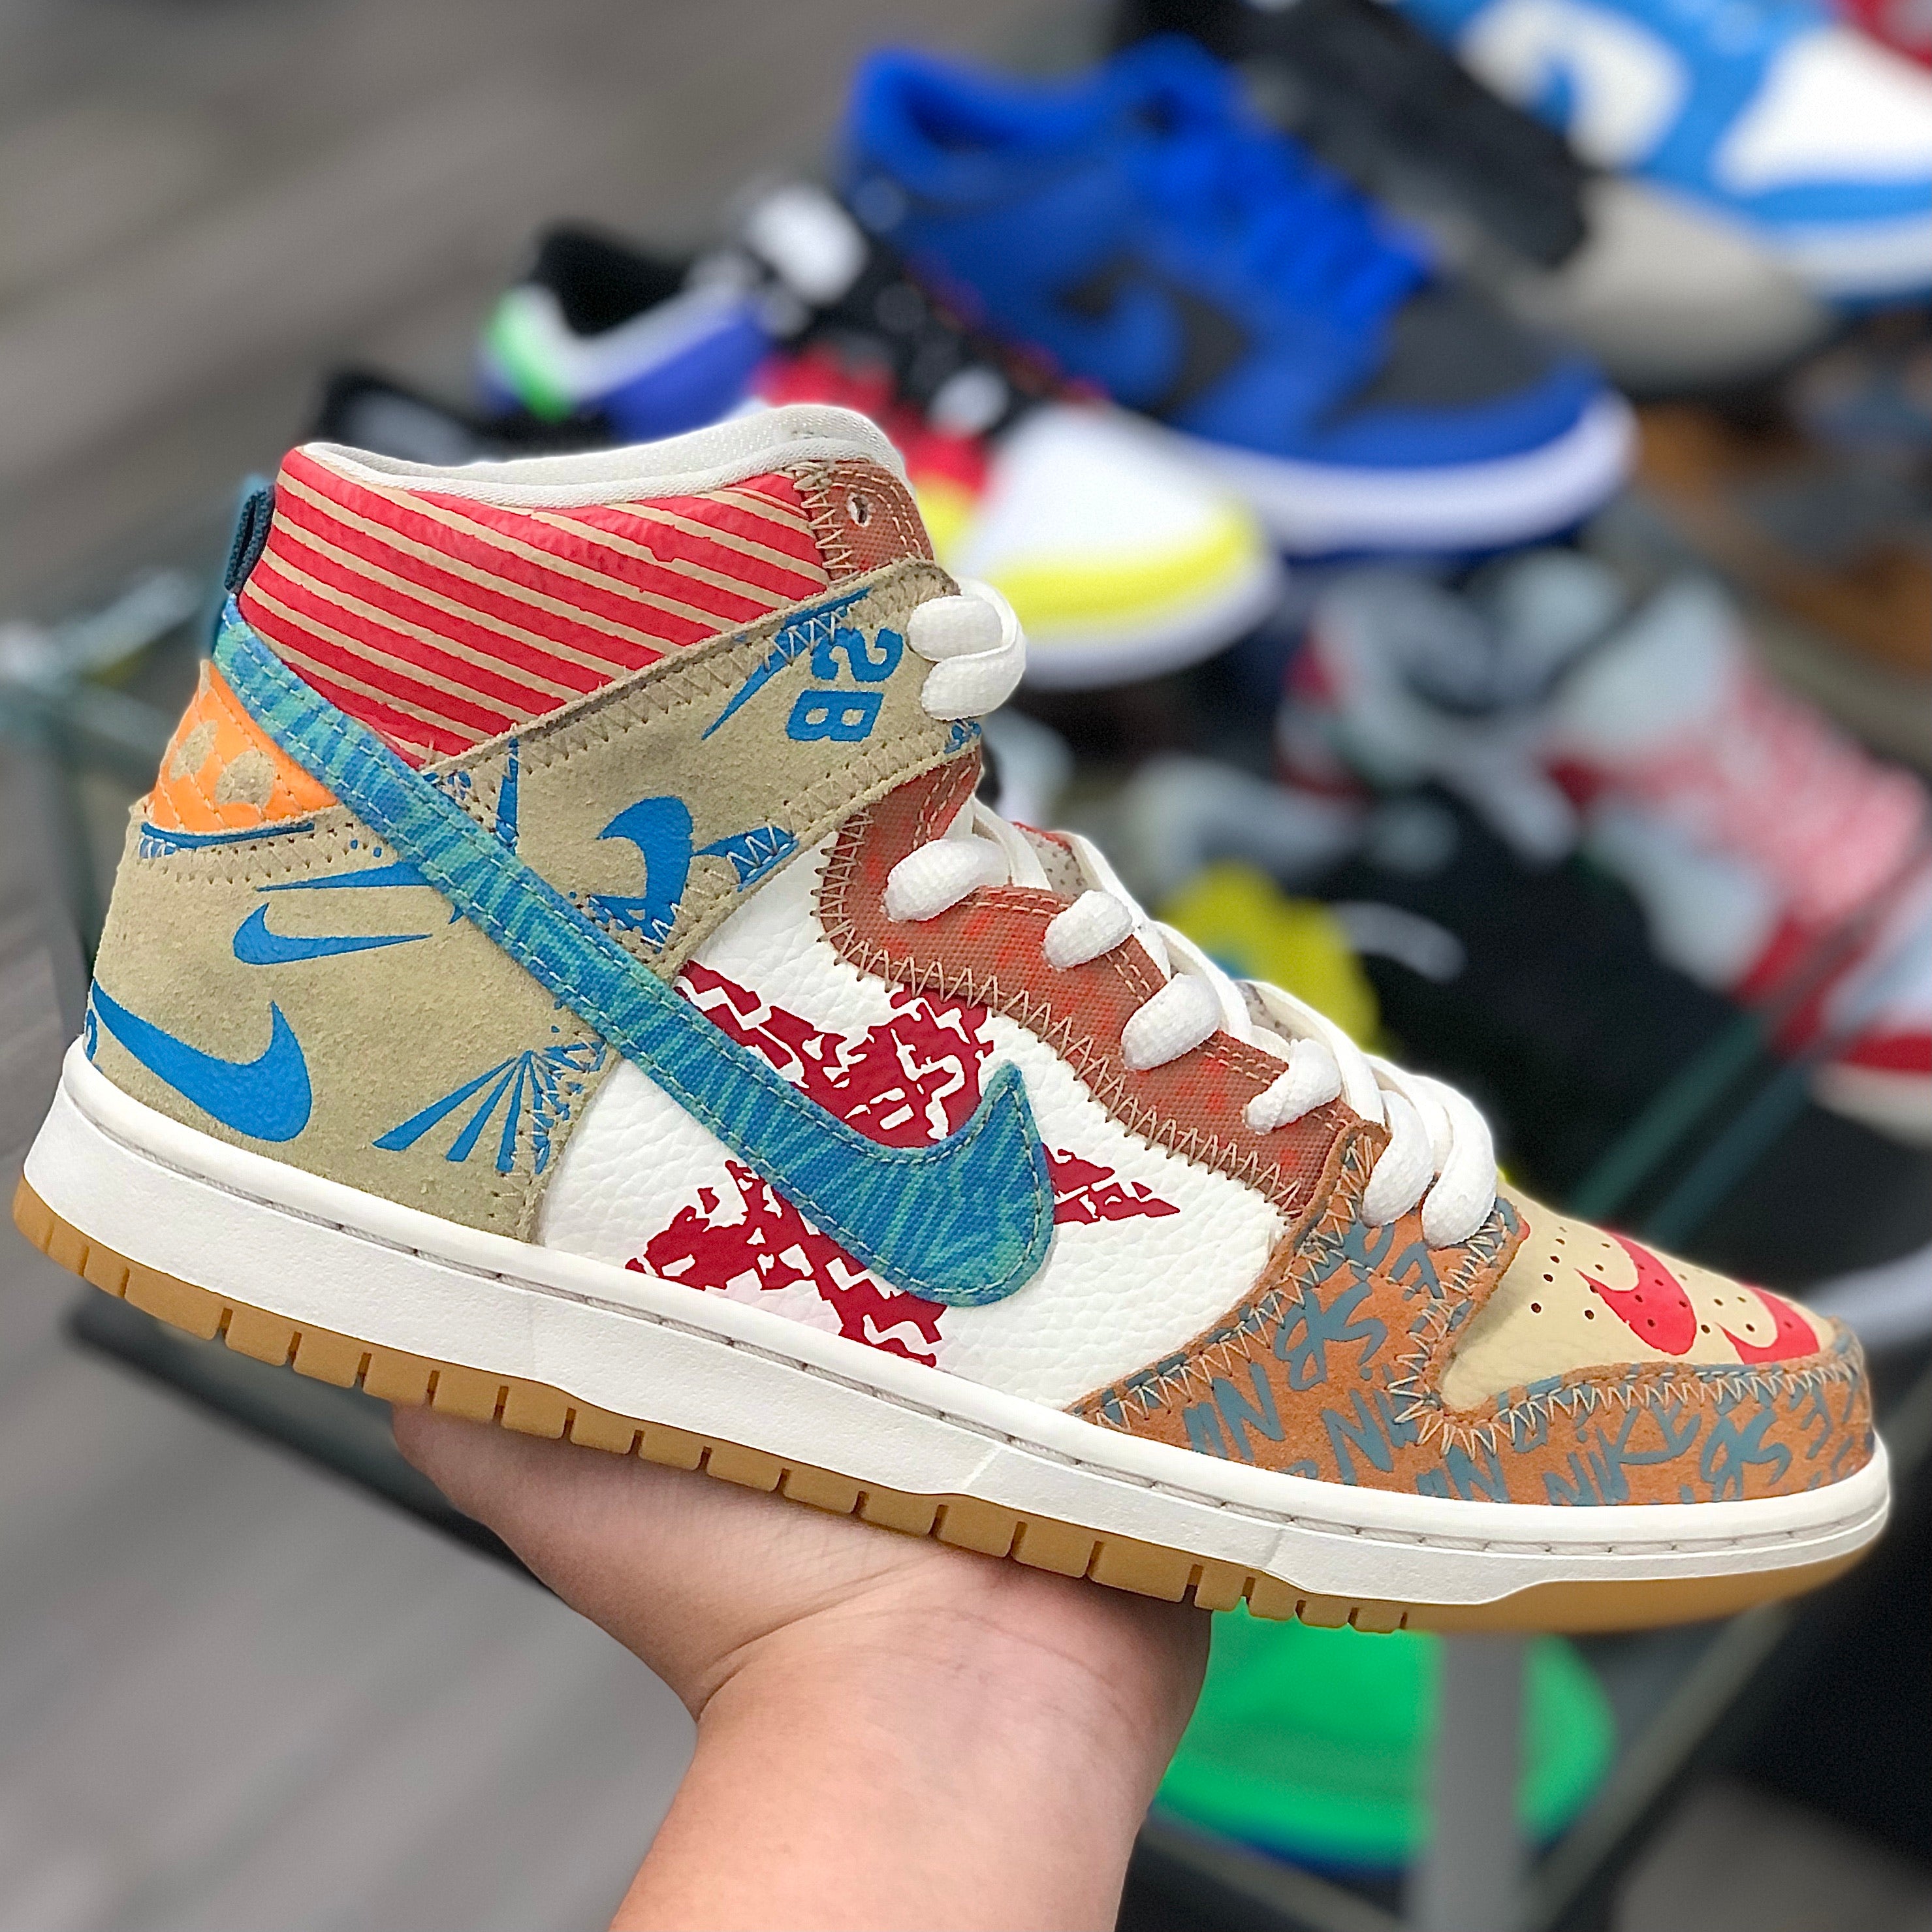 Nike SB Zoom Dunk High “Thomas Campbell What The”